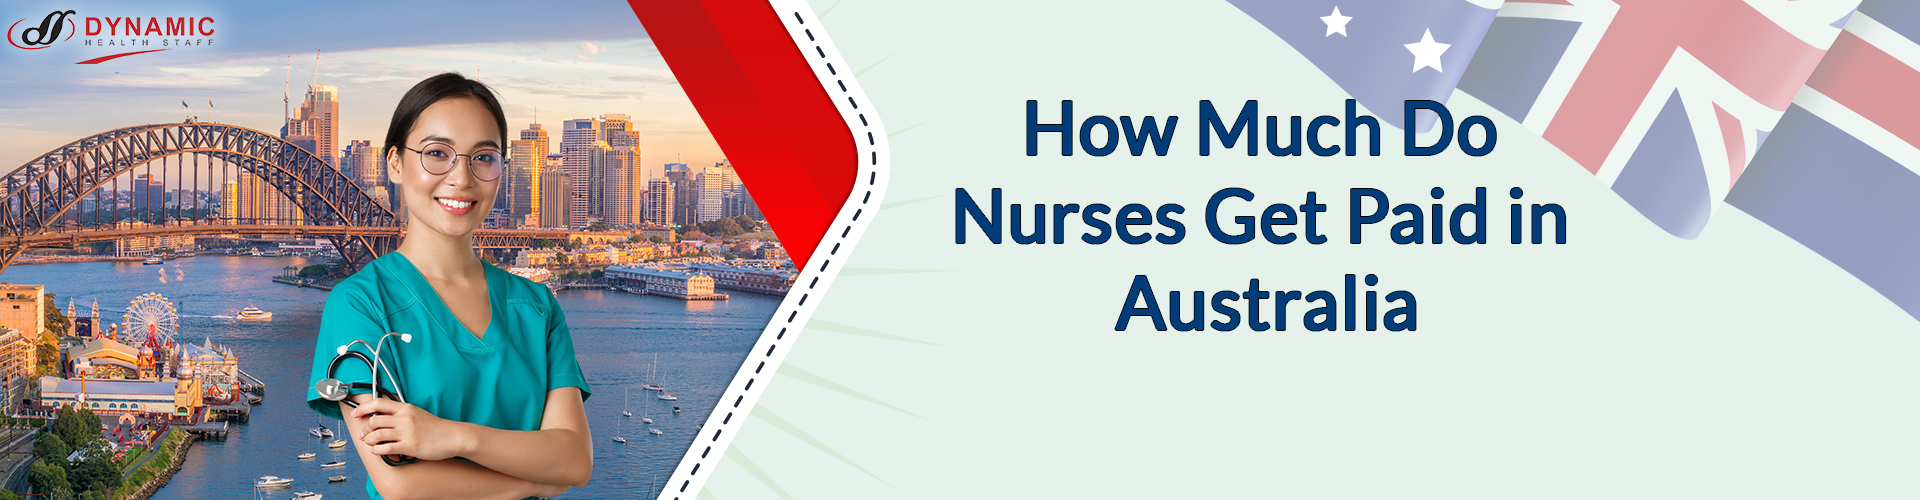 How Much Do Nurses Get Paid in Australia